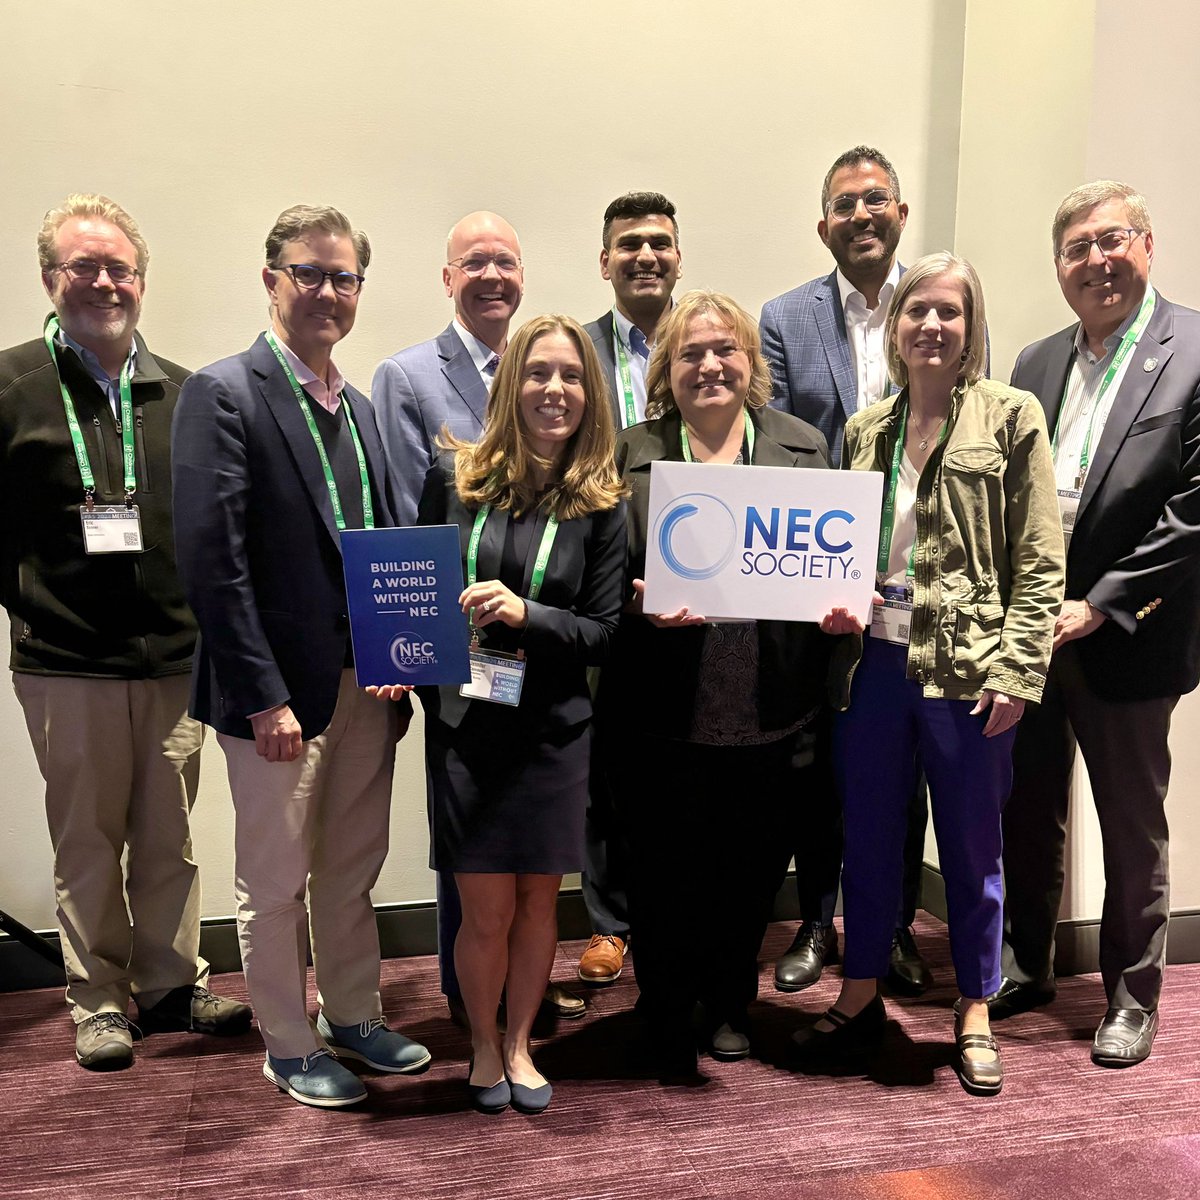 The NEC postgrad course @PASMeeting was full of inspirational presentations & compelling science! Thanks to speakers @mcelroylab @ravimpatelmd @Meg_Parker_MD @jenncanvasser @crmartin90 & everyone who spent the day with us! Join us for the NEC Focus Group & Networking! #preventNEC